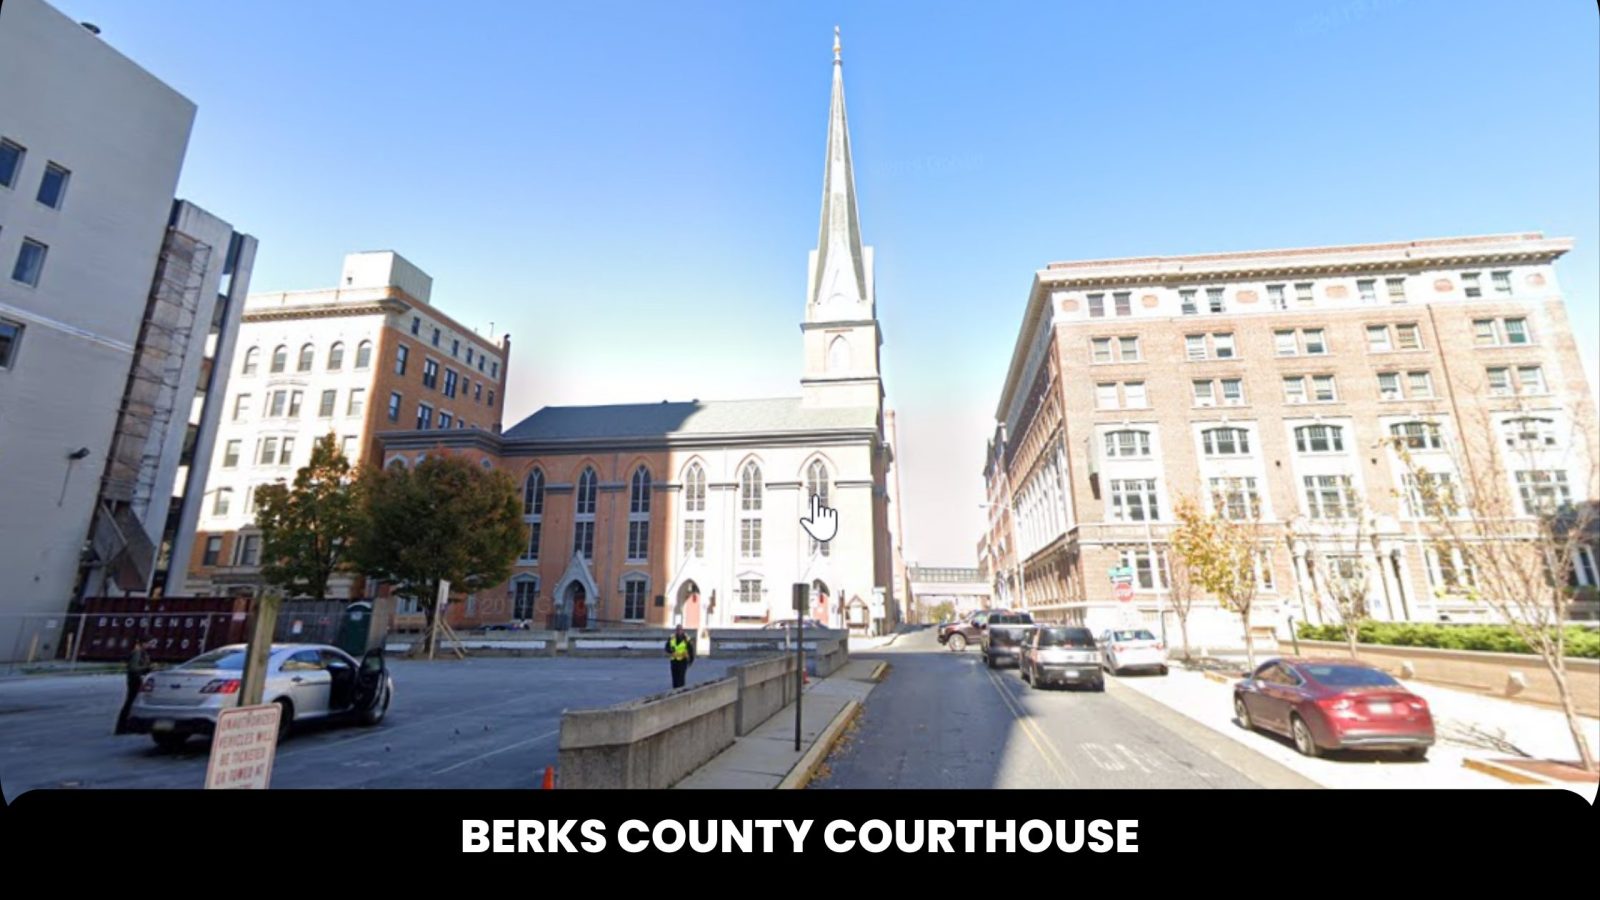 Berks County Courthouse